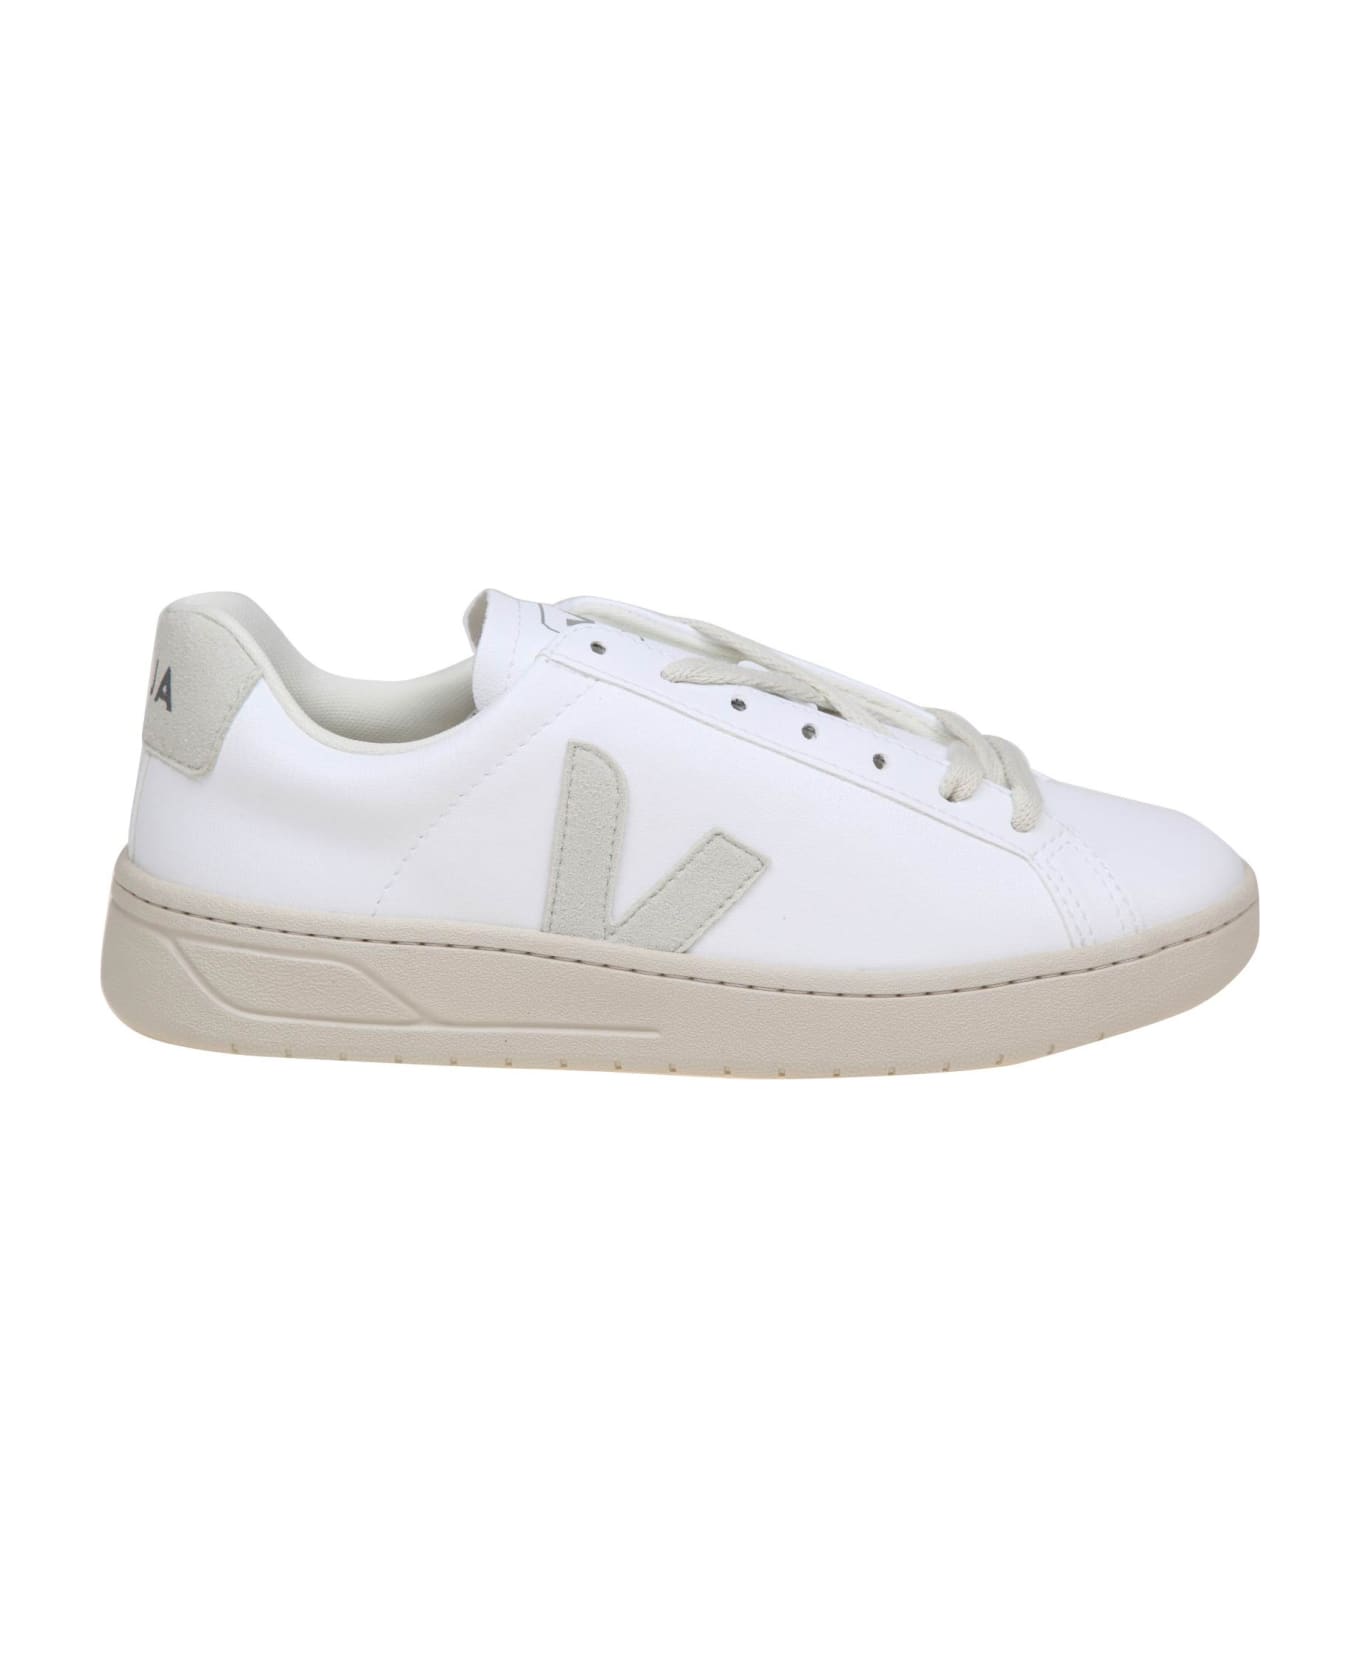 Veja Urca Sneakers In White Coated Cotton